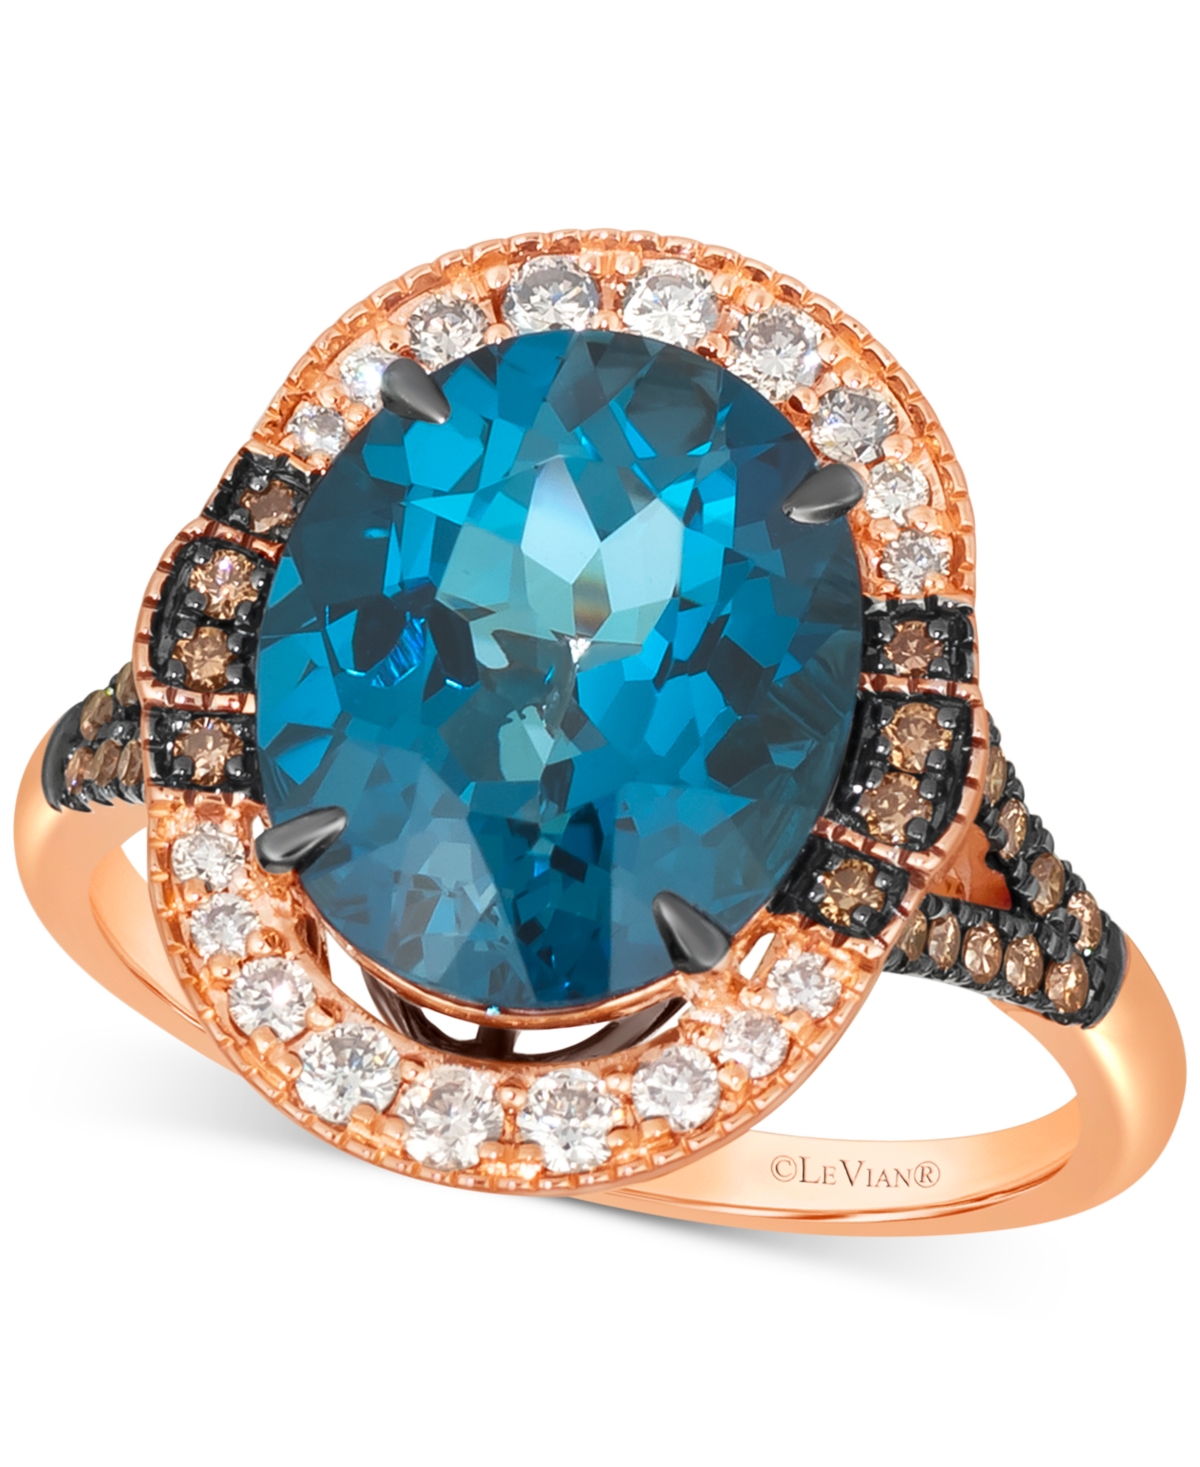 Le Vian Deep Sea Blue Topaz (5 Ct. T.w.) & Diamond (1/2 Ct. T.w.) Halo Ring In 14k Rose Gold In K Strawberry Gold Ring